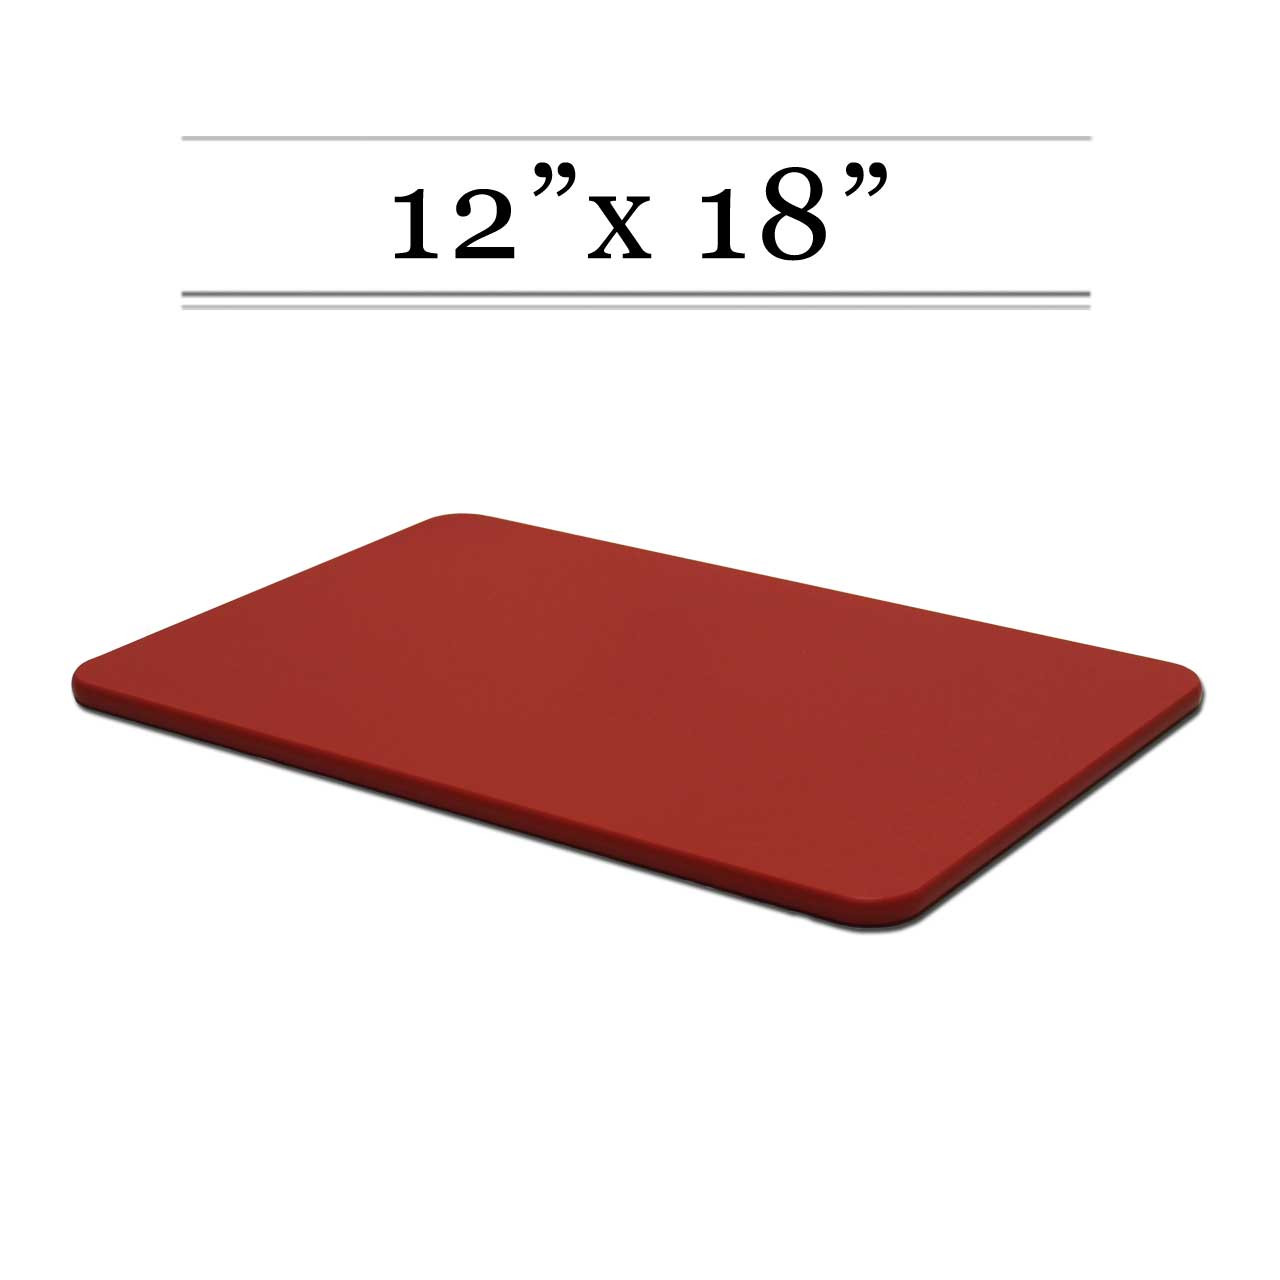 Commercial Red Plastic HDPE Cutting Board, NSF Certified - 18 x